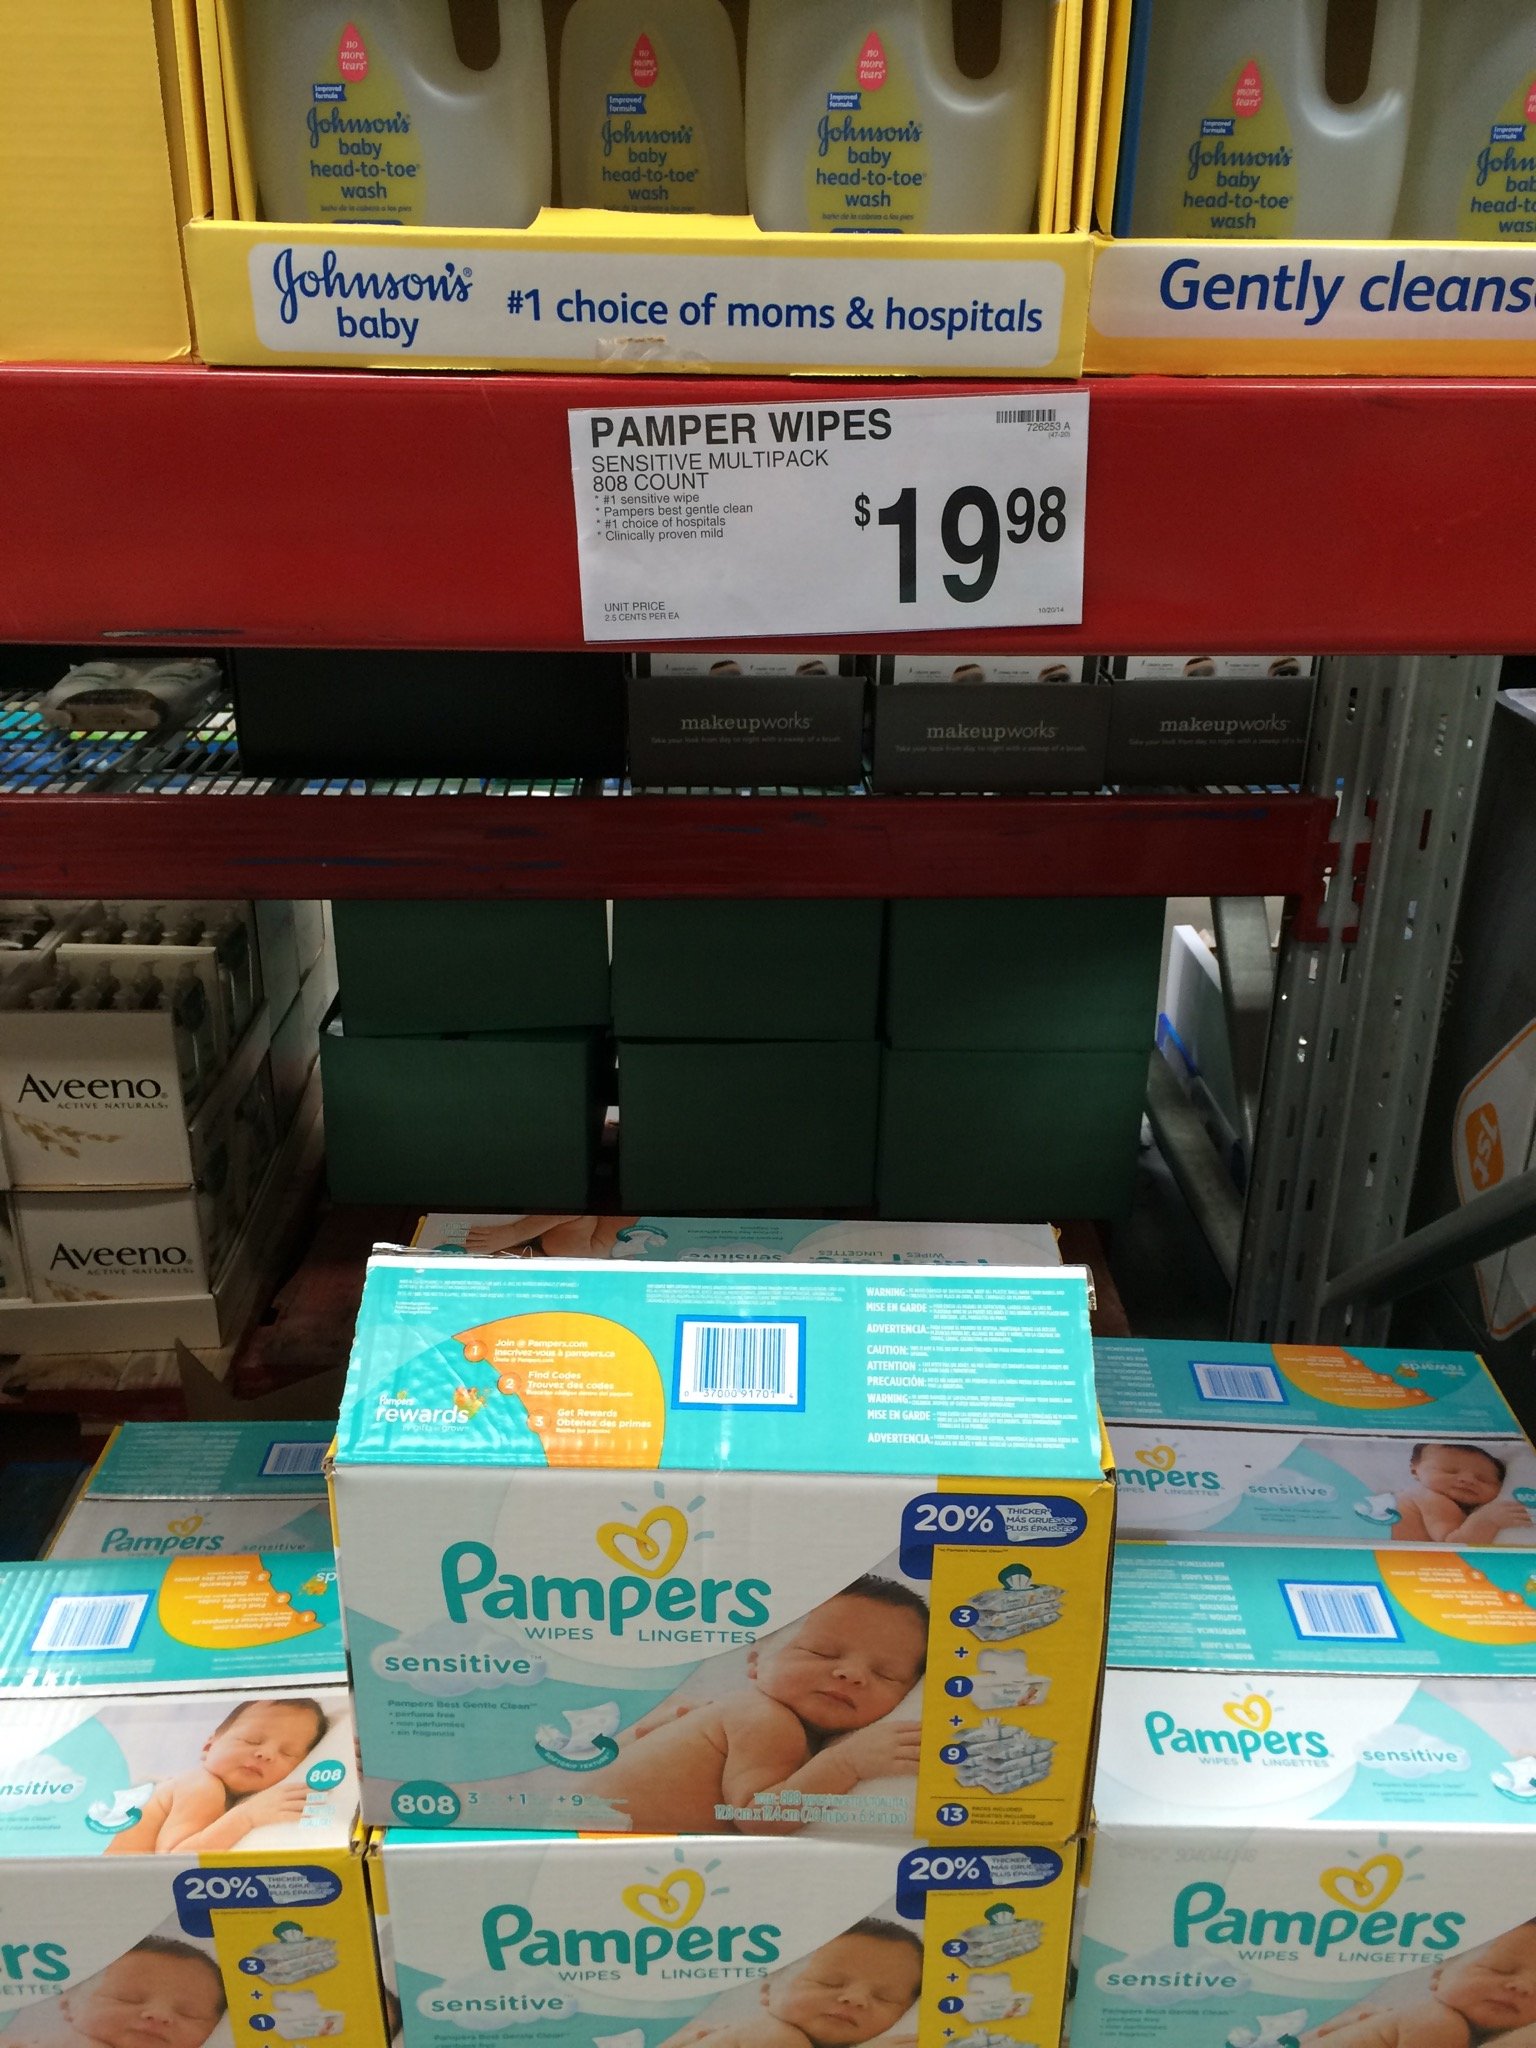 Sams, Costco And Amazon Price Comparison on Diapers and Wipes